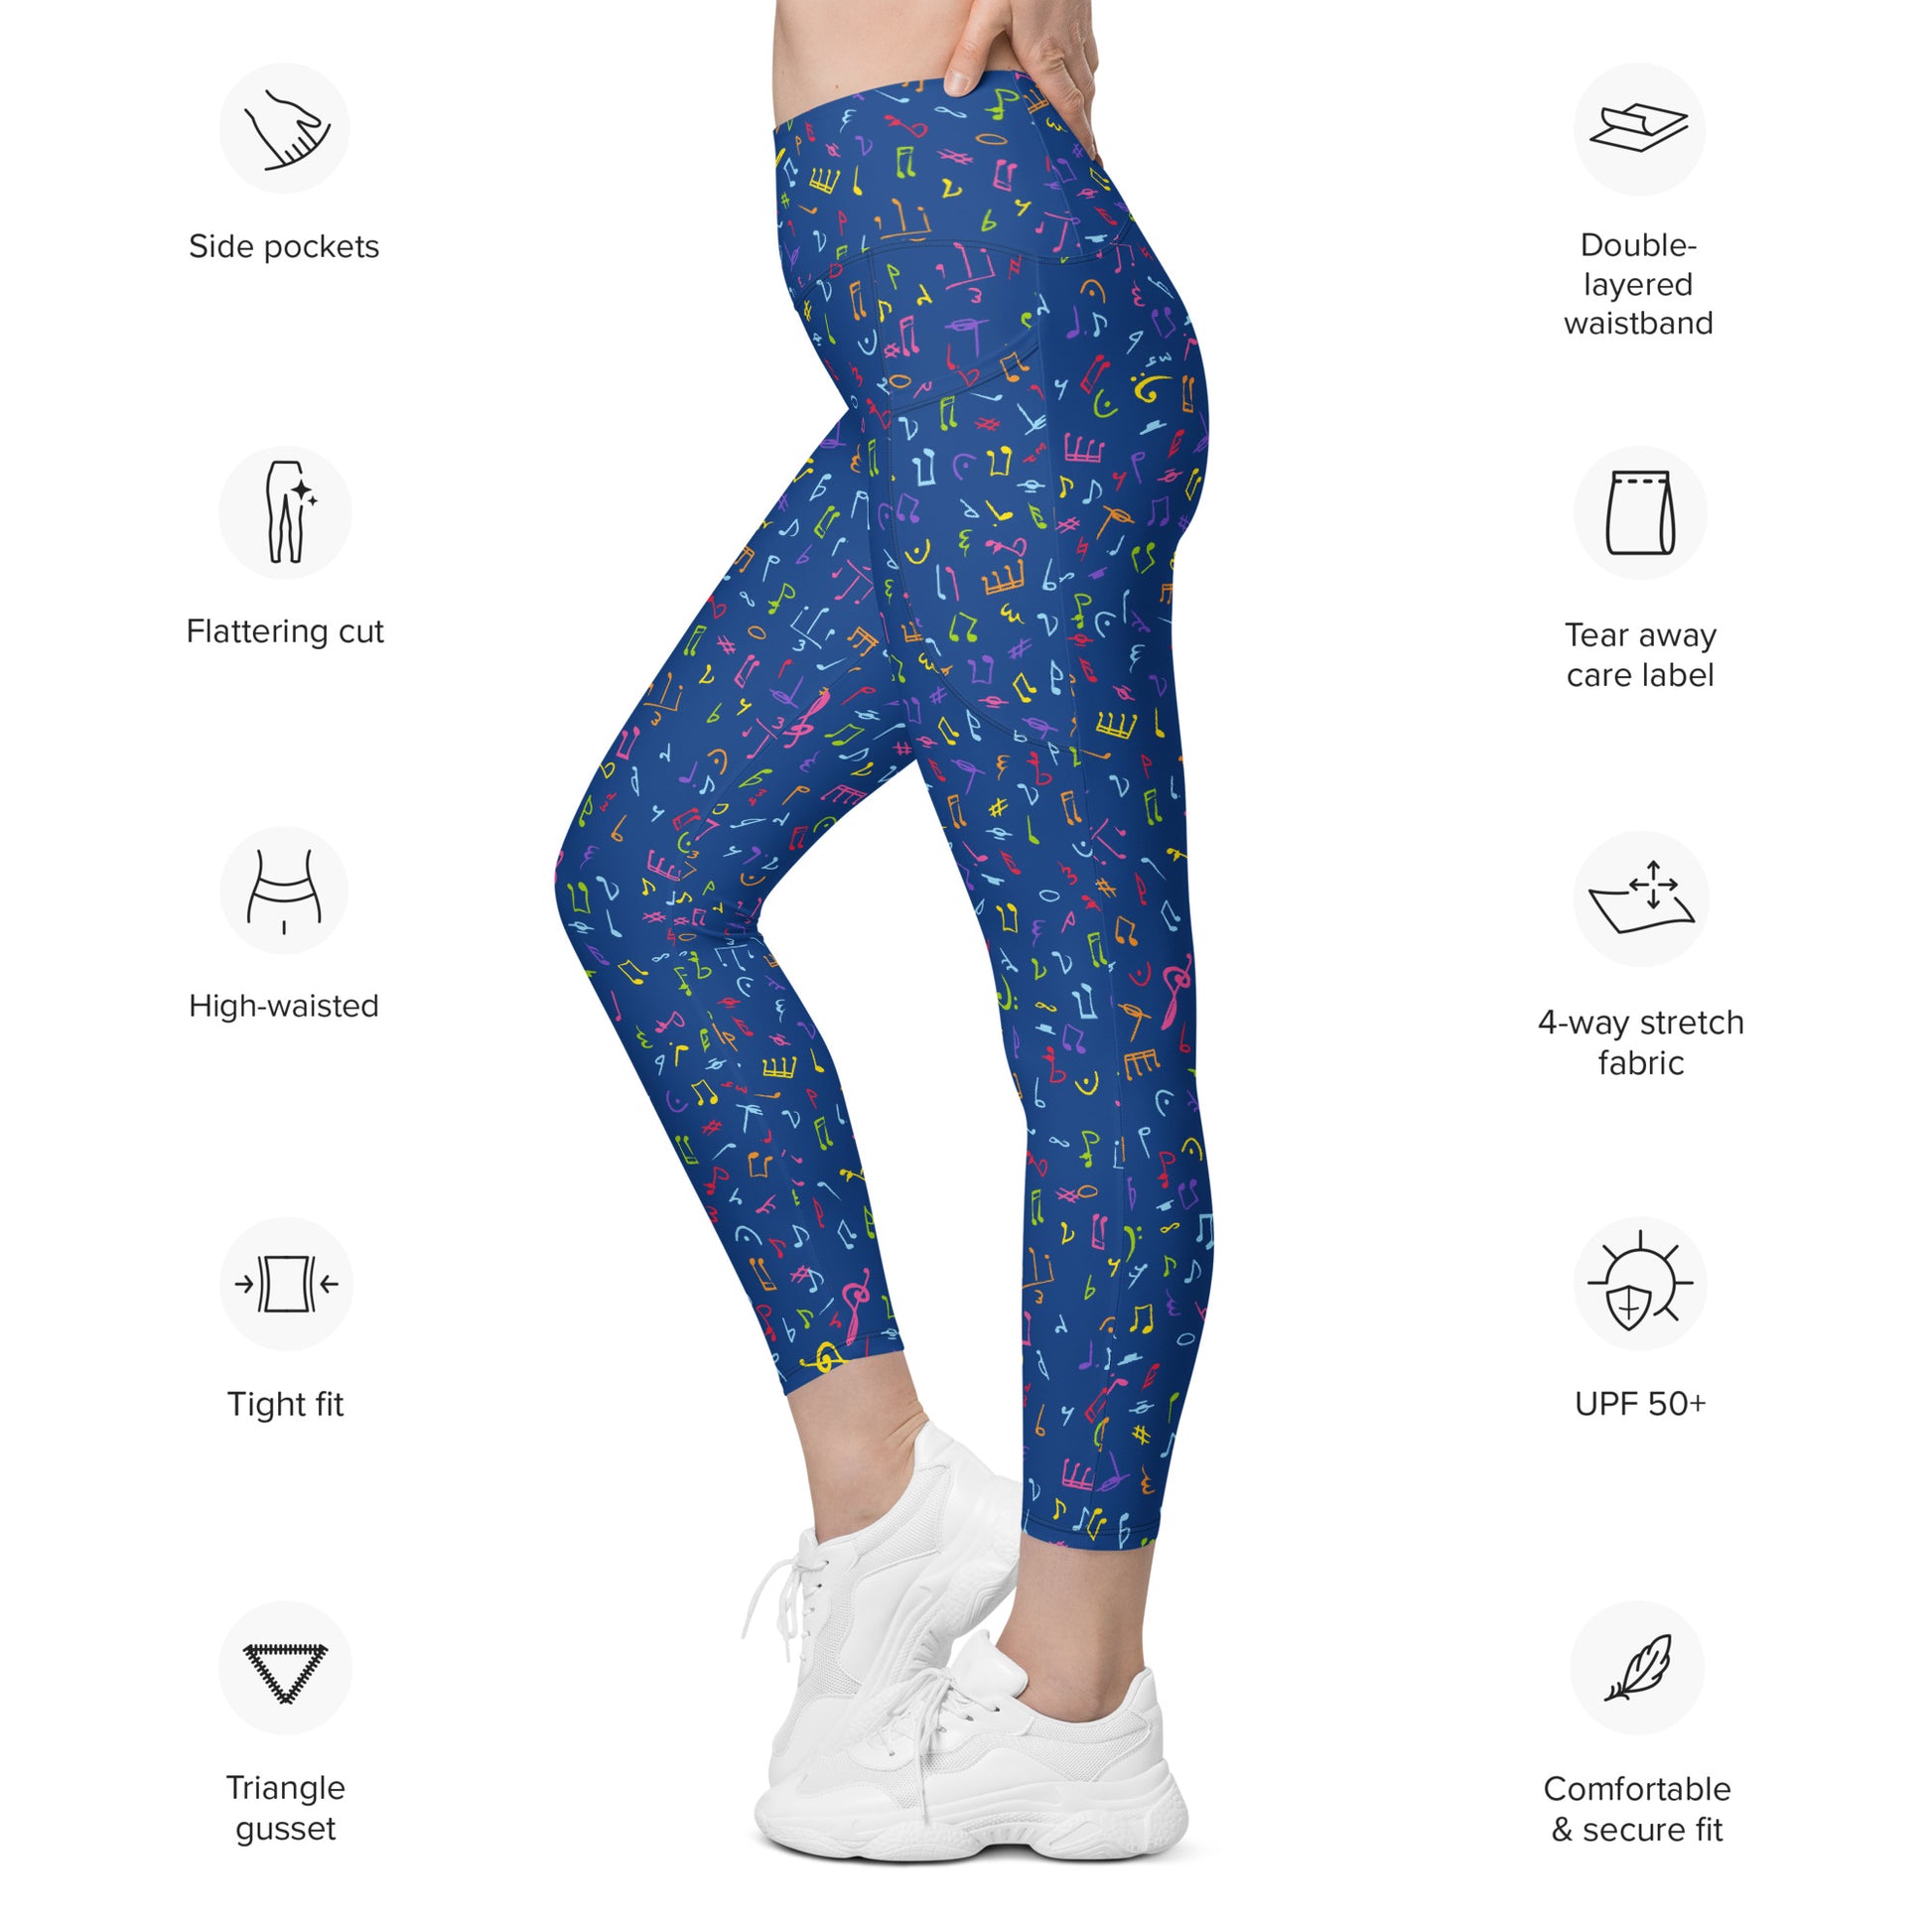 Music Notes - Leggings with pockets, 2XS - 6XL Leggings With Pockets 2XS - 6XL (US)